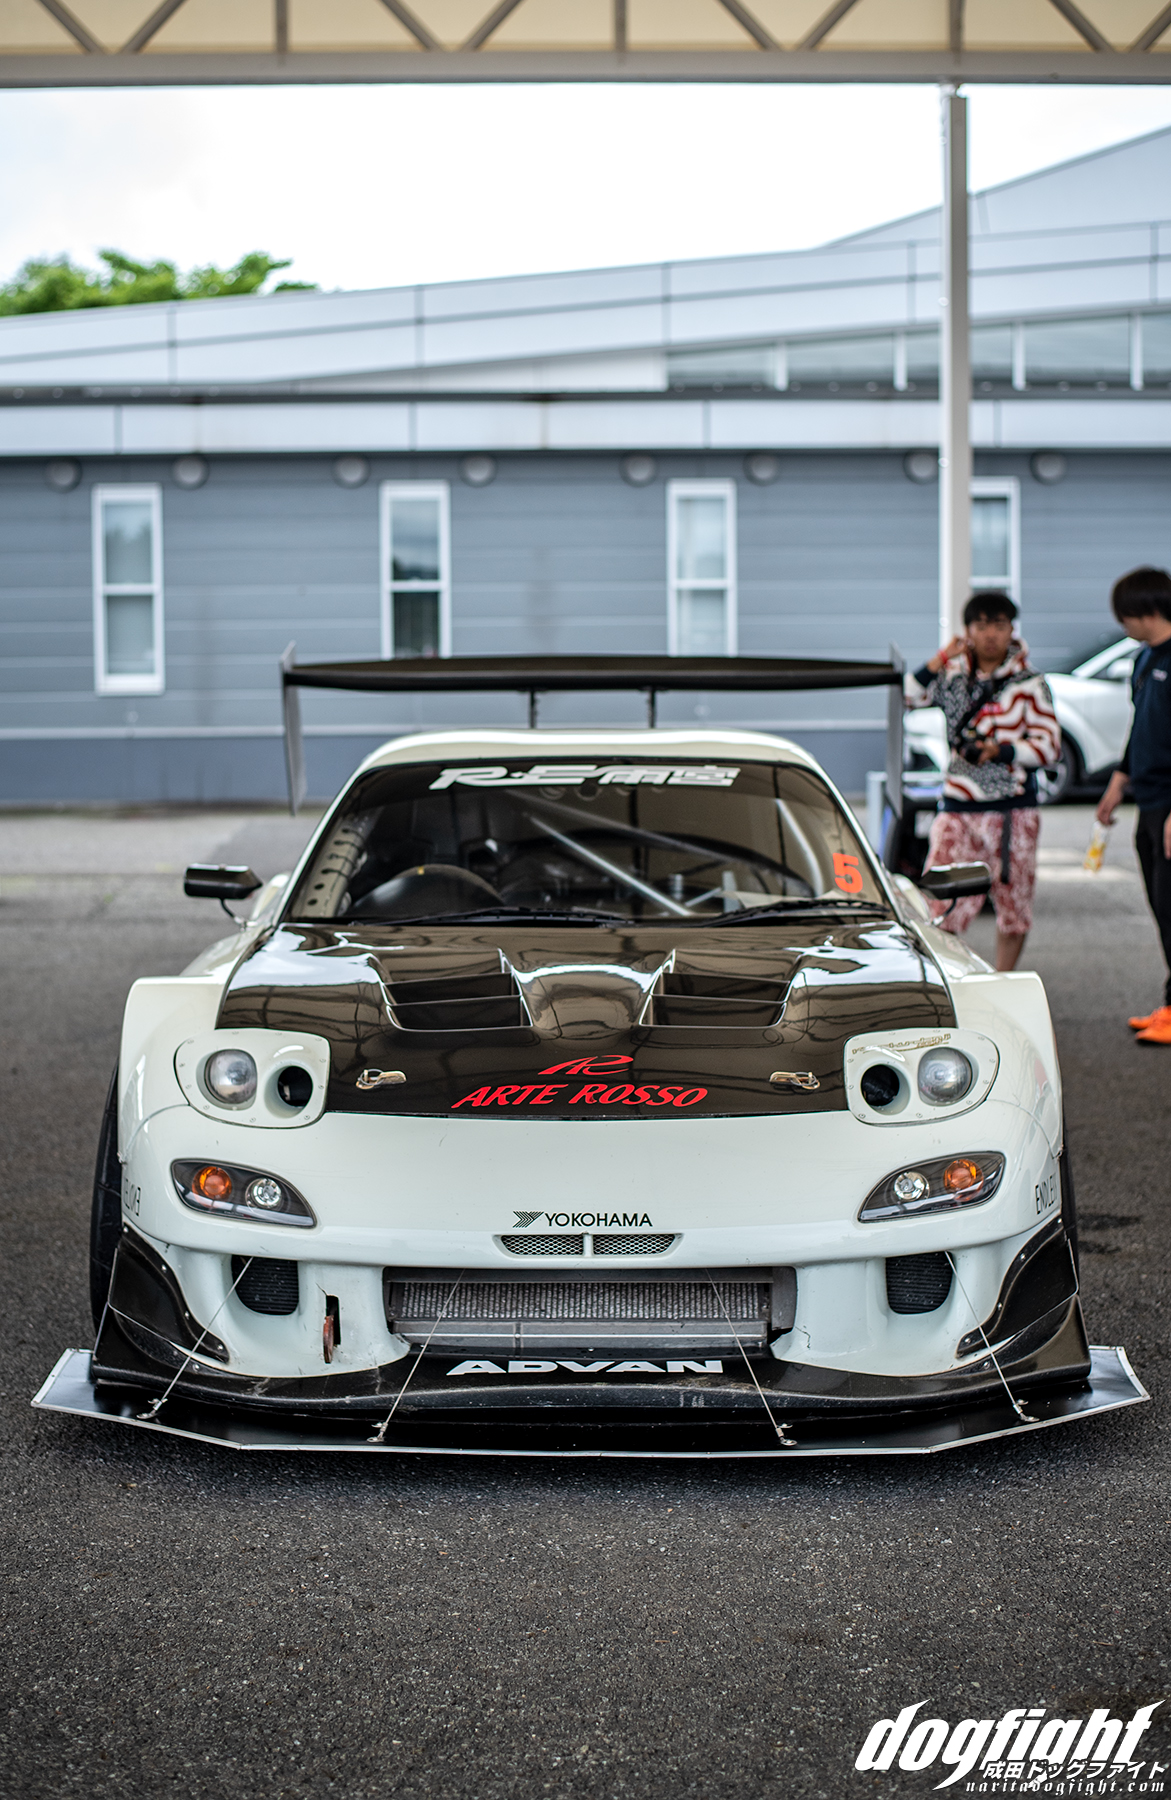 Frontal View Mazda RX 7 White Cars Race Cars Car Vehicle Japanese Cars Car Spoiler Bodykit Japanese 1171x1800